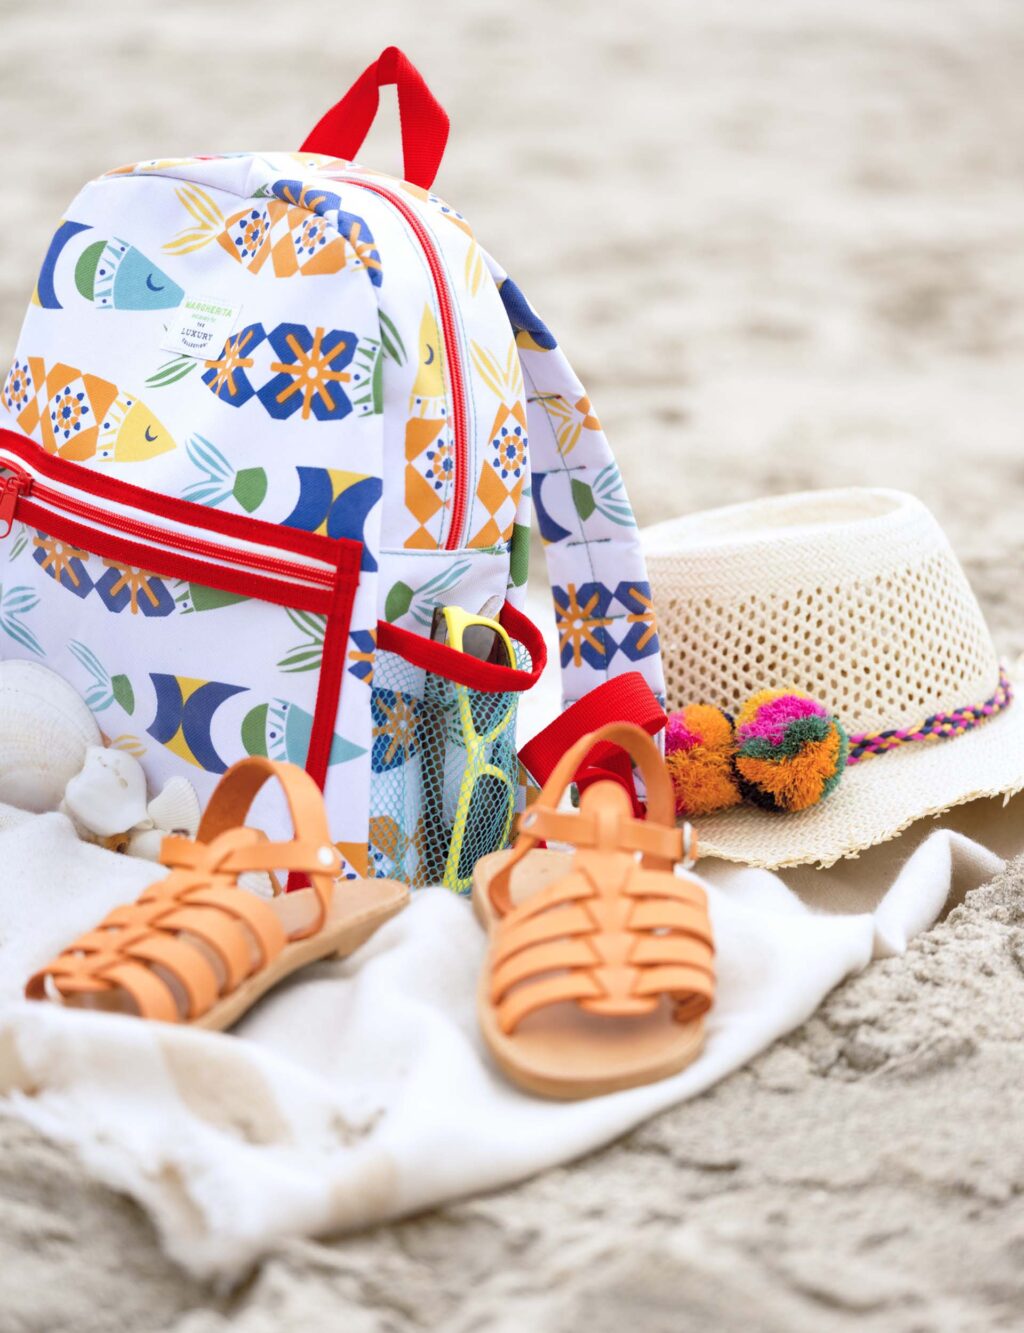 the Margherita Maccapani Missoni Children's Backpack for The Luxury Collection sits on a beach towel in the sand, along with children's sandles and a sun hat